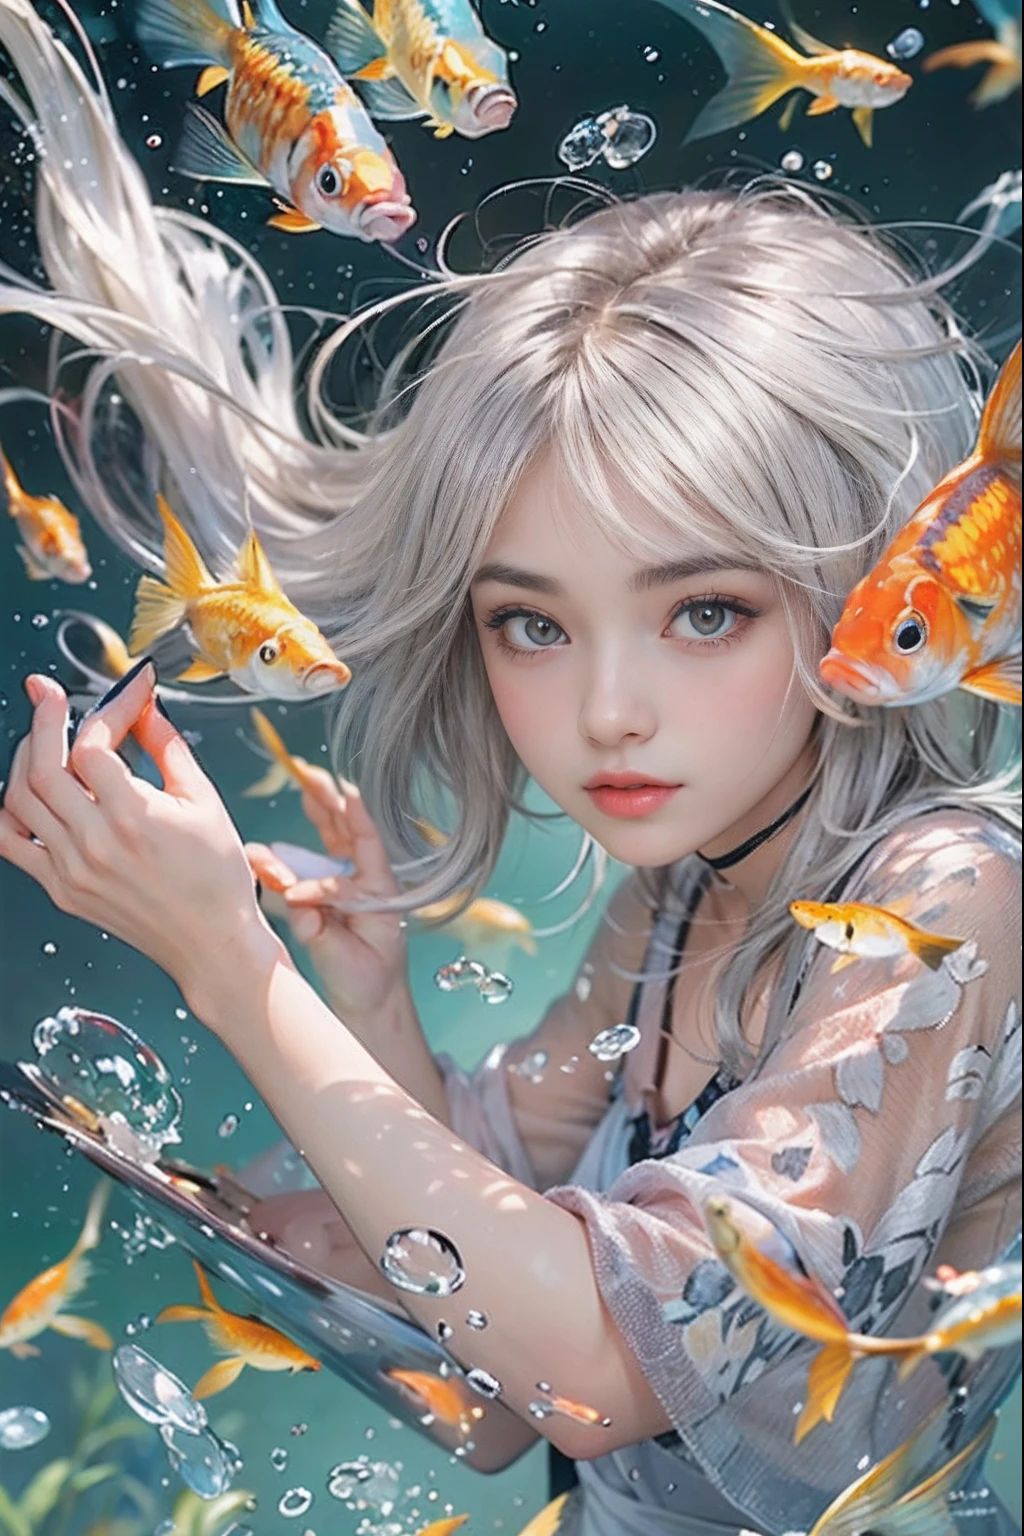 Beautiful girl playing with a bowl of water or fish, Gamine, is playing  happily, Fish, swirling schools of silver fish - SeaArt AI